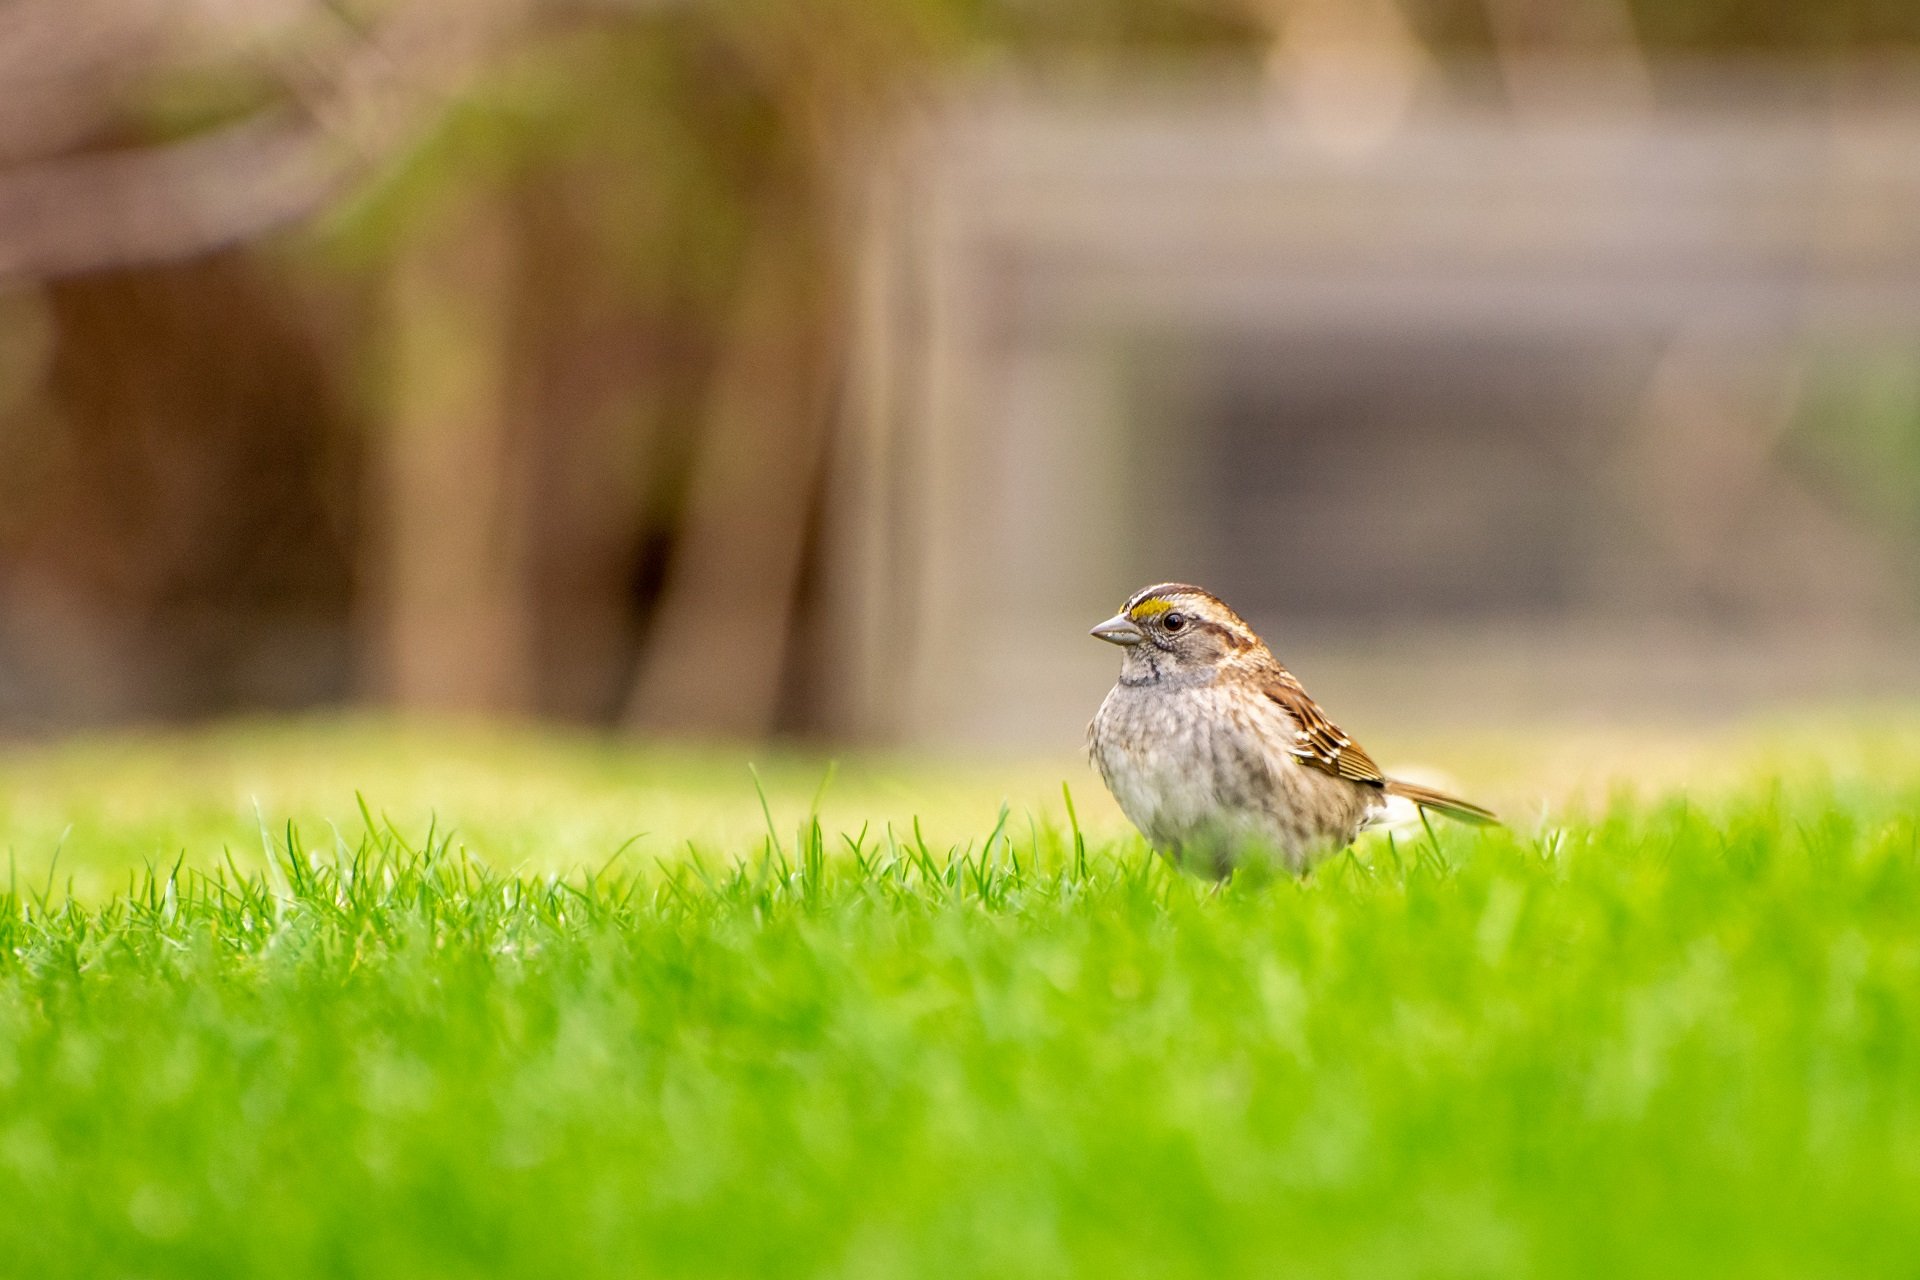 A White-throated Sparrow stands in the grass.